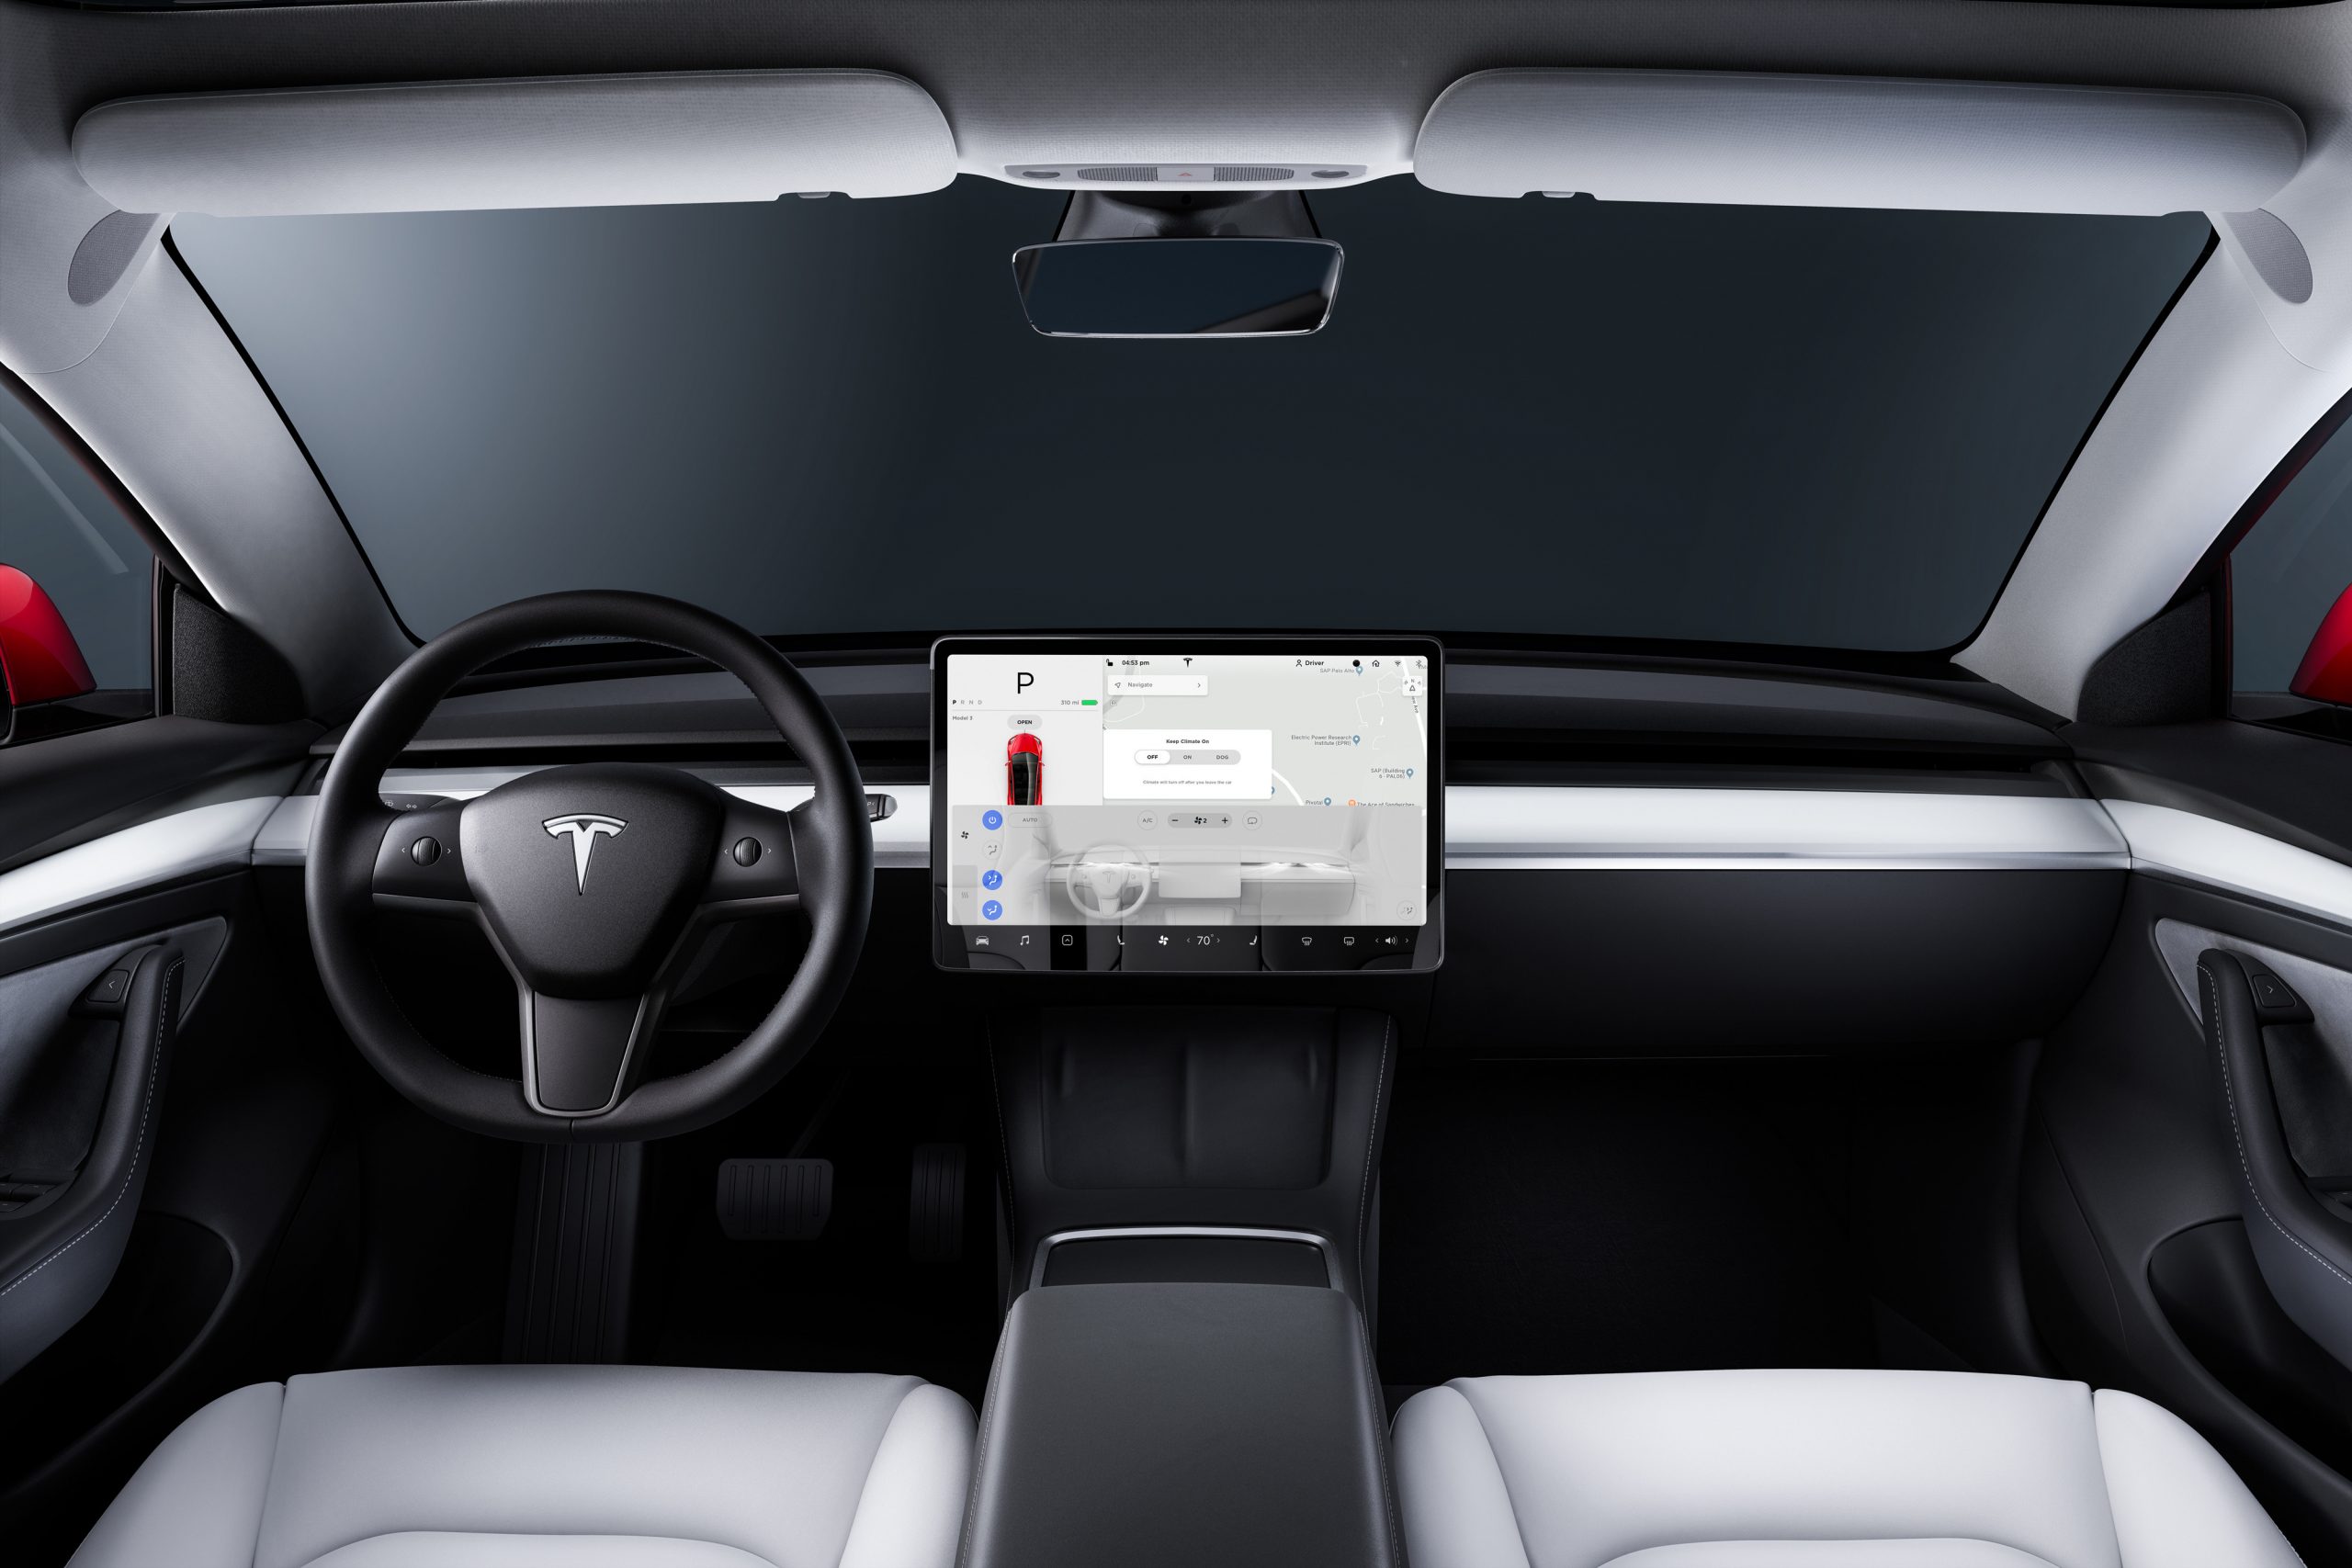 Tesla-style Over-the-Air updates will save OEMs 1.5 Billion